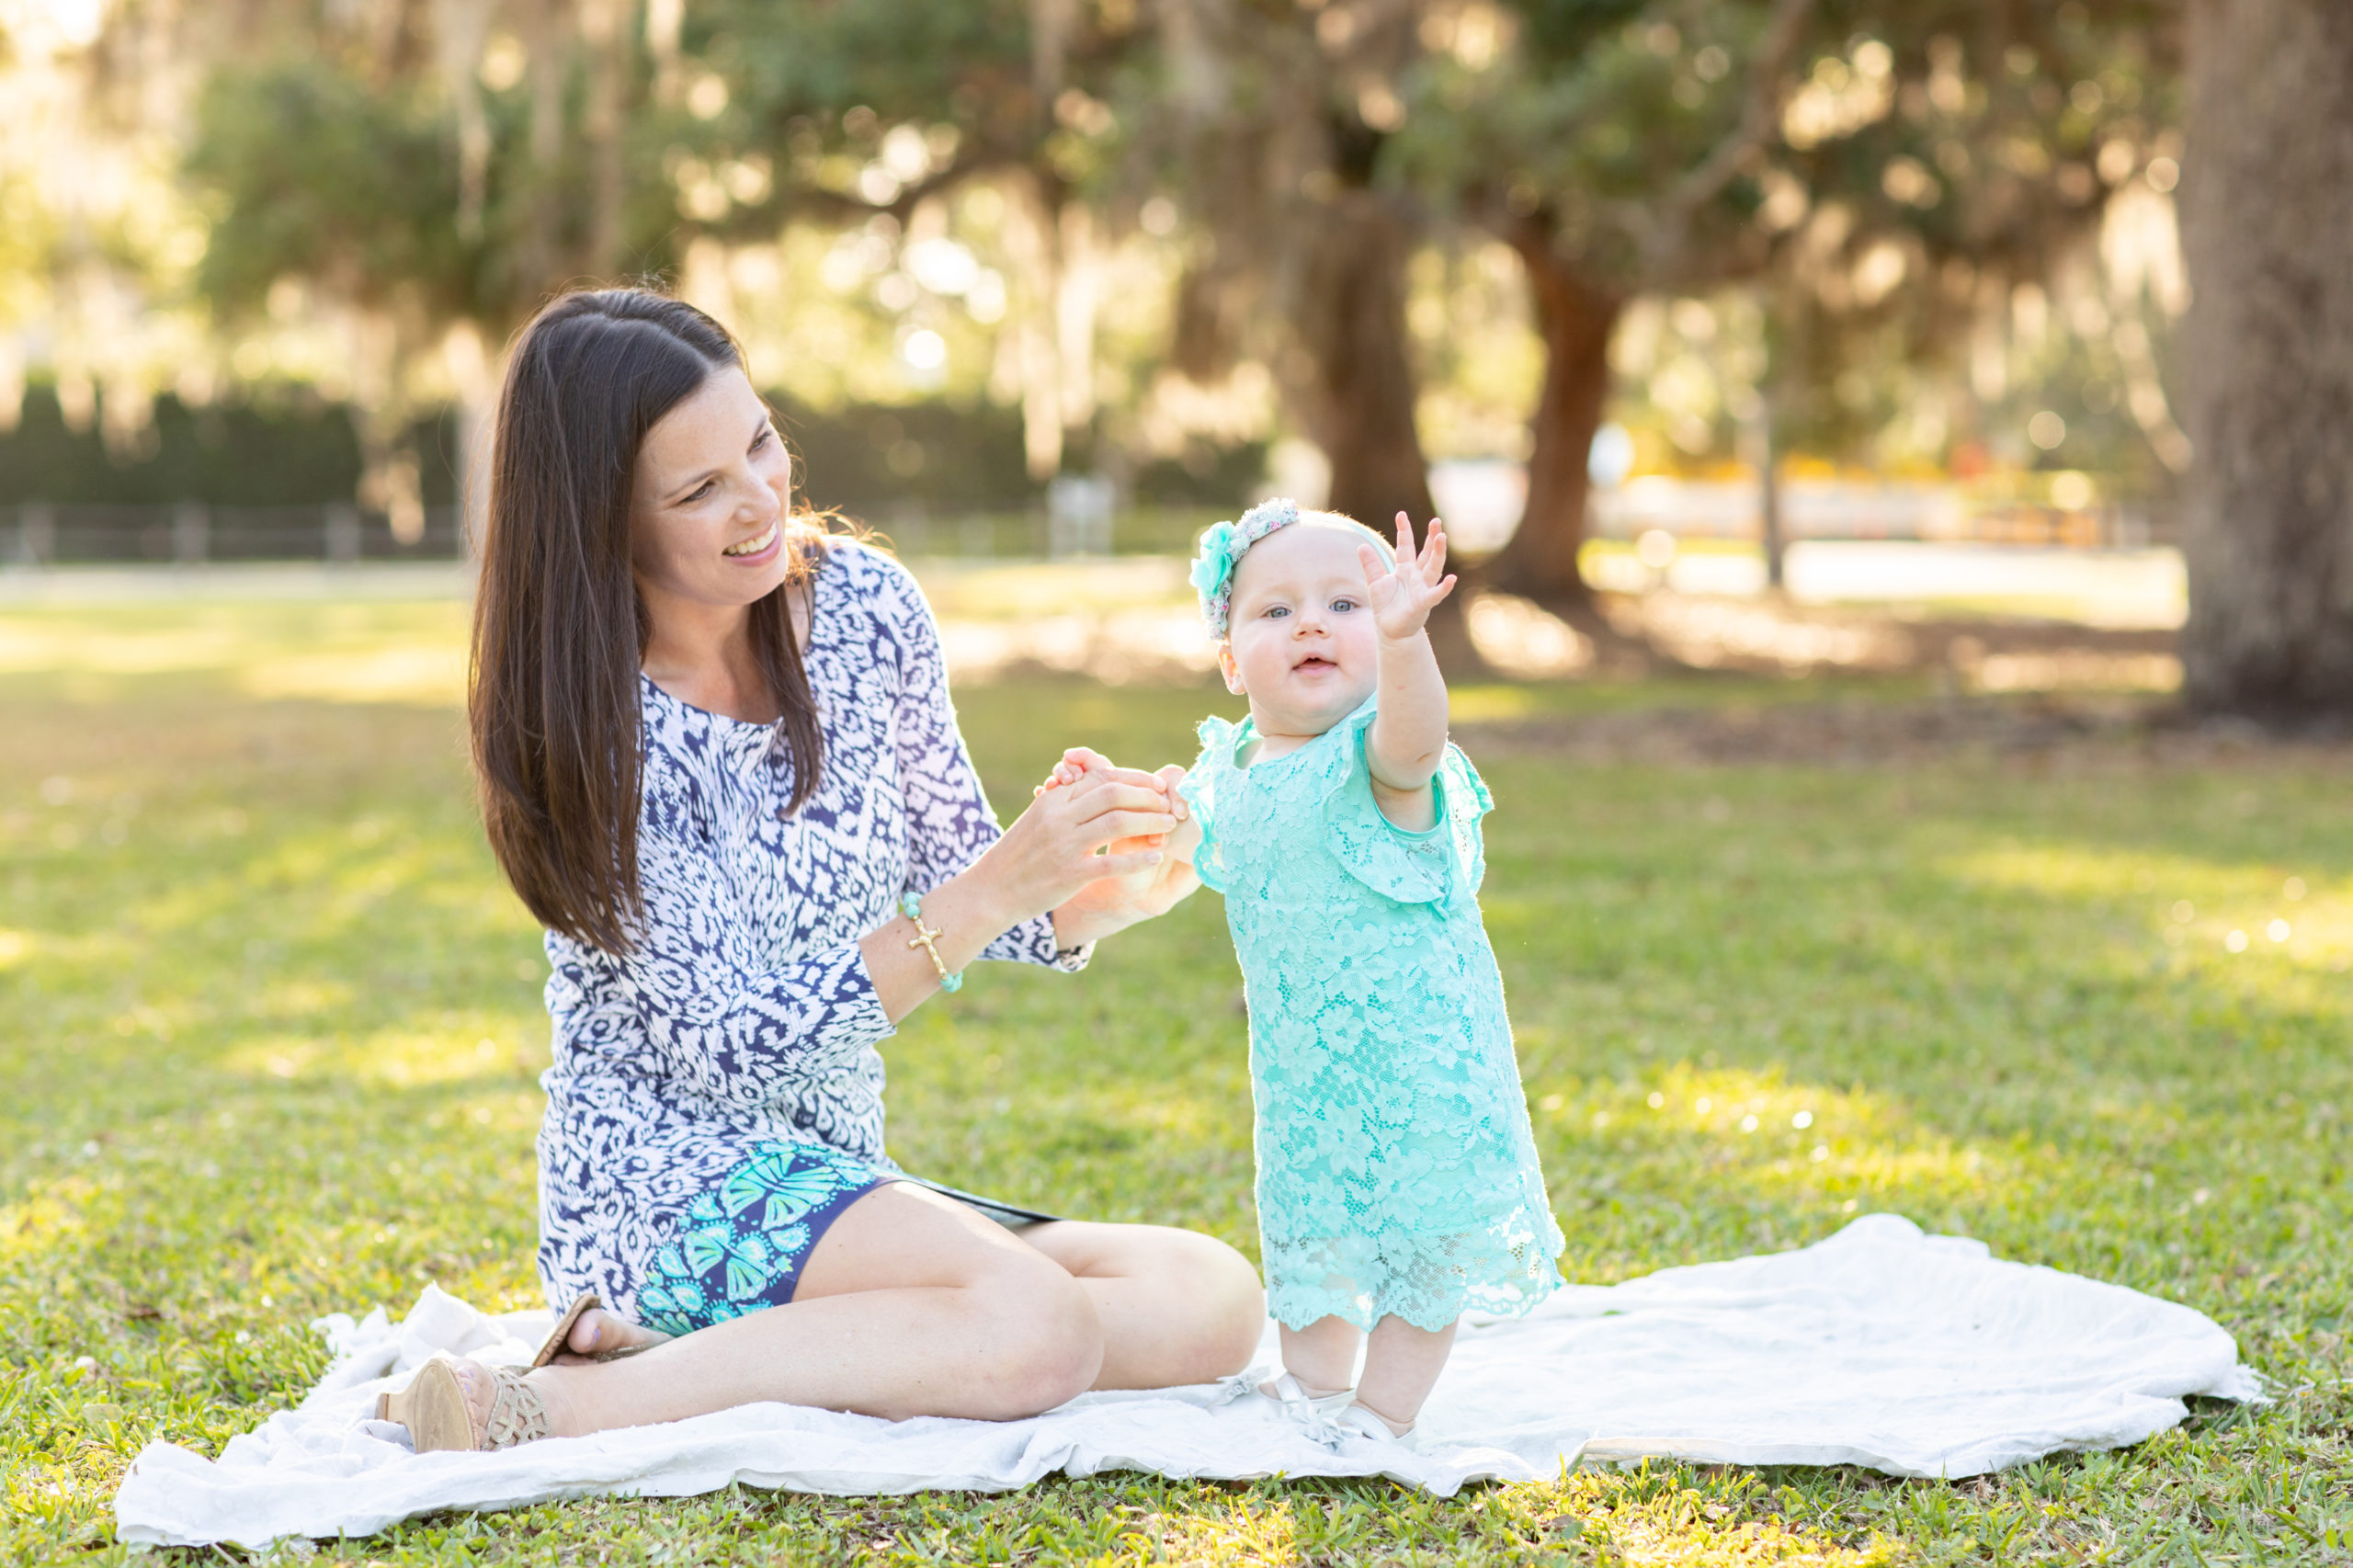 Mother and daughter smiling and waving at the camera while sitting on the grass